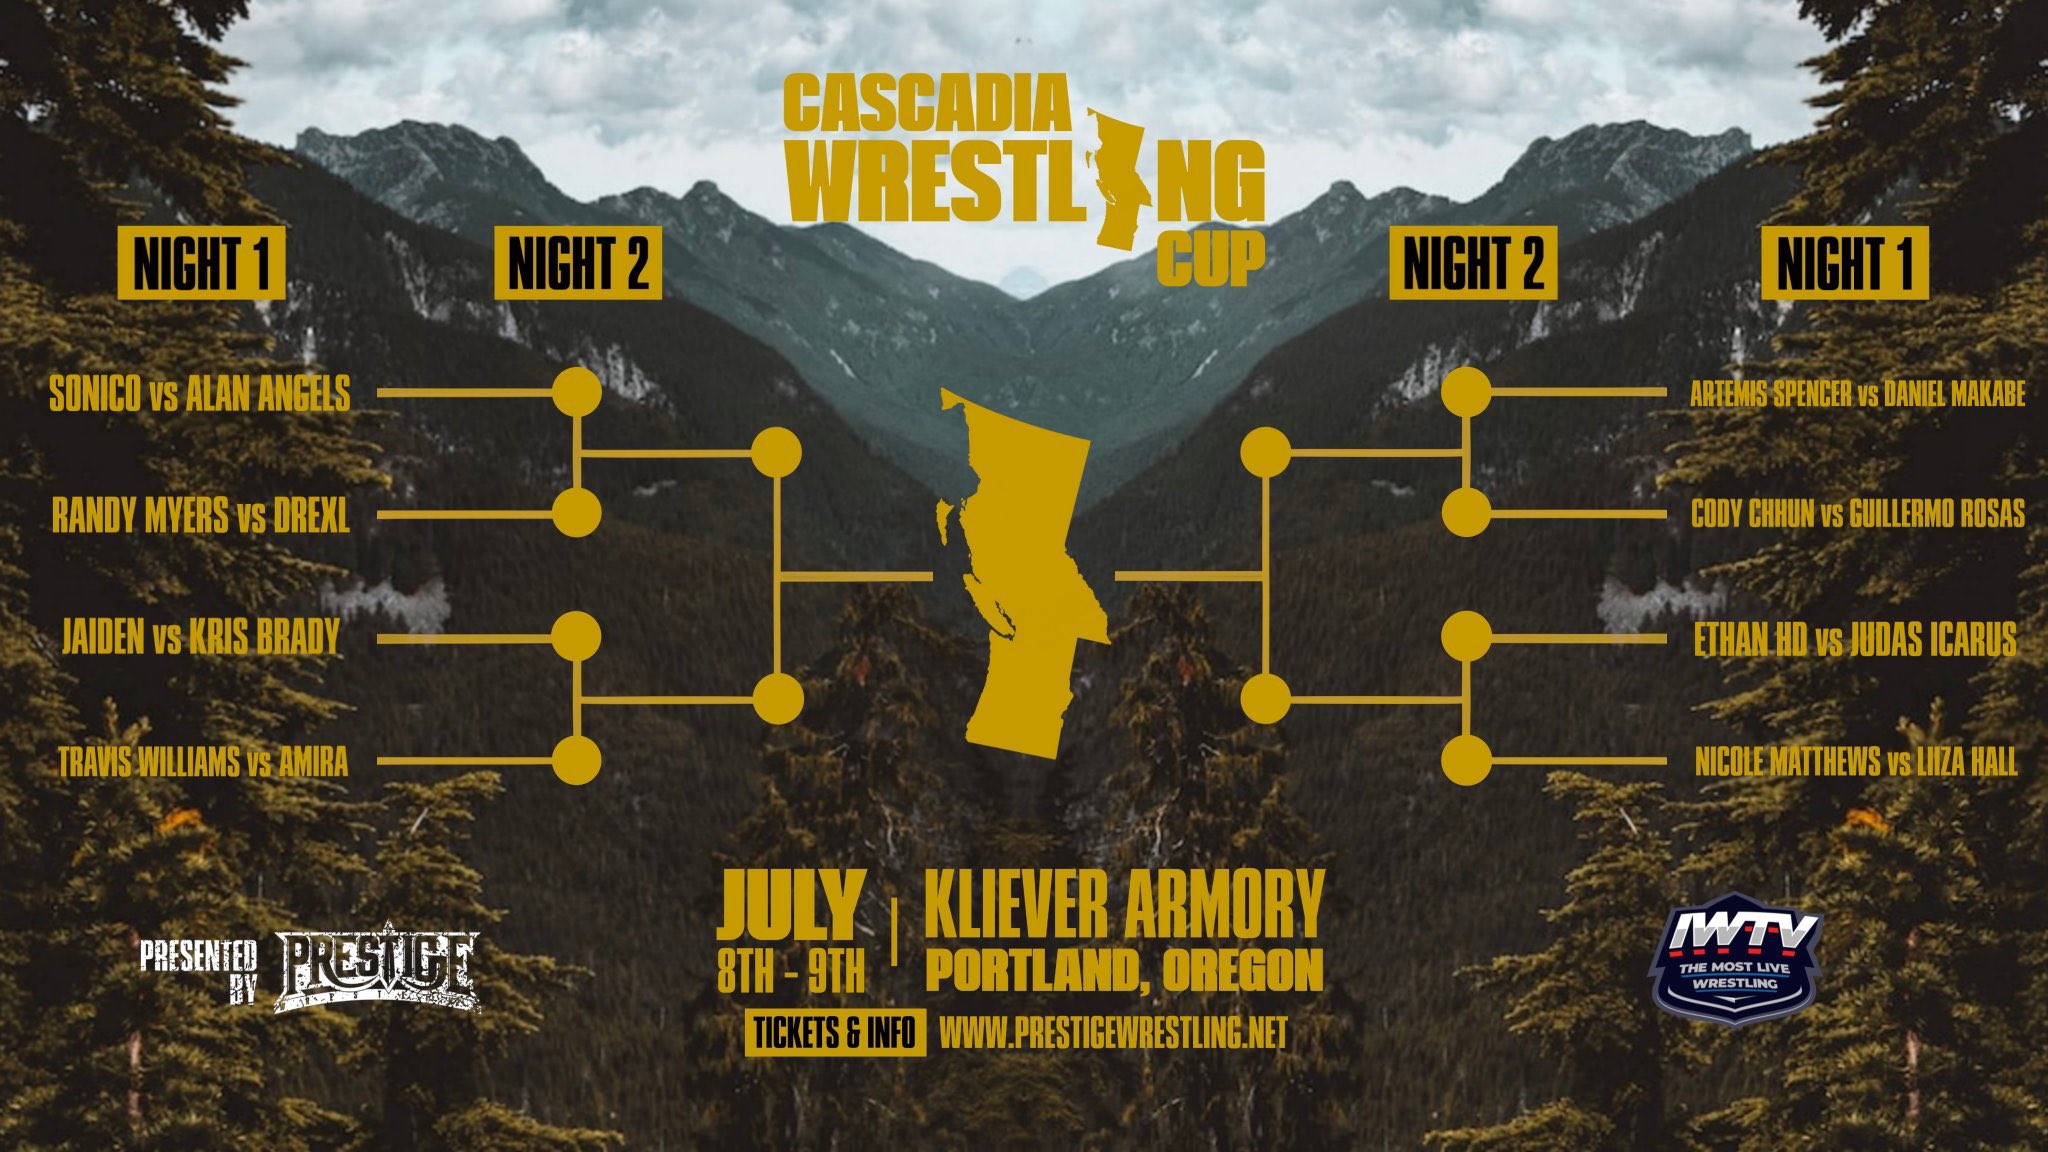 Prestige Wrestlings Cascadia Wrestling Cup Events Now Streaming on YouTube 